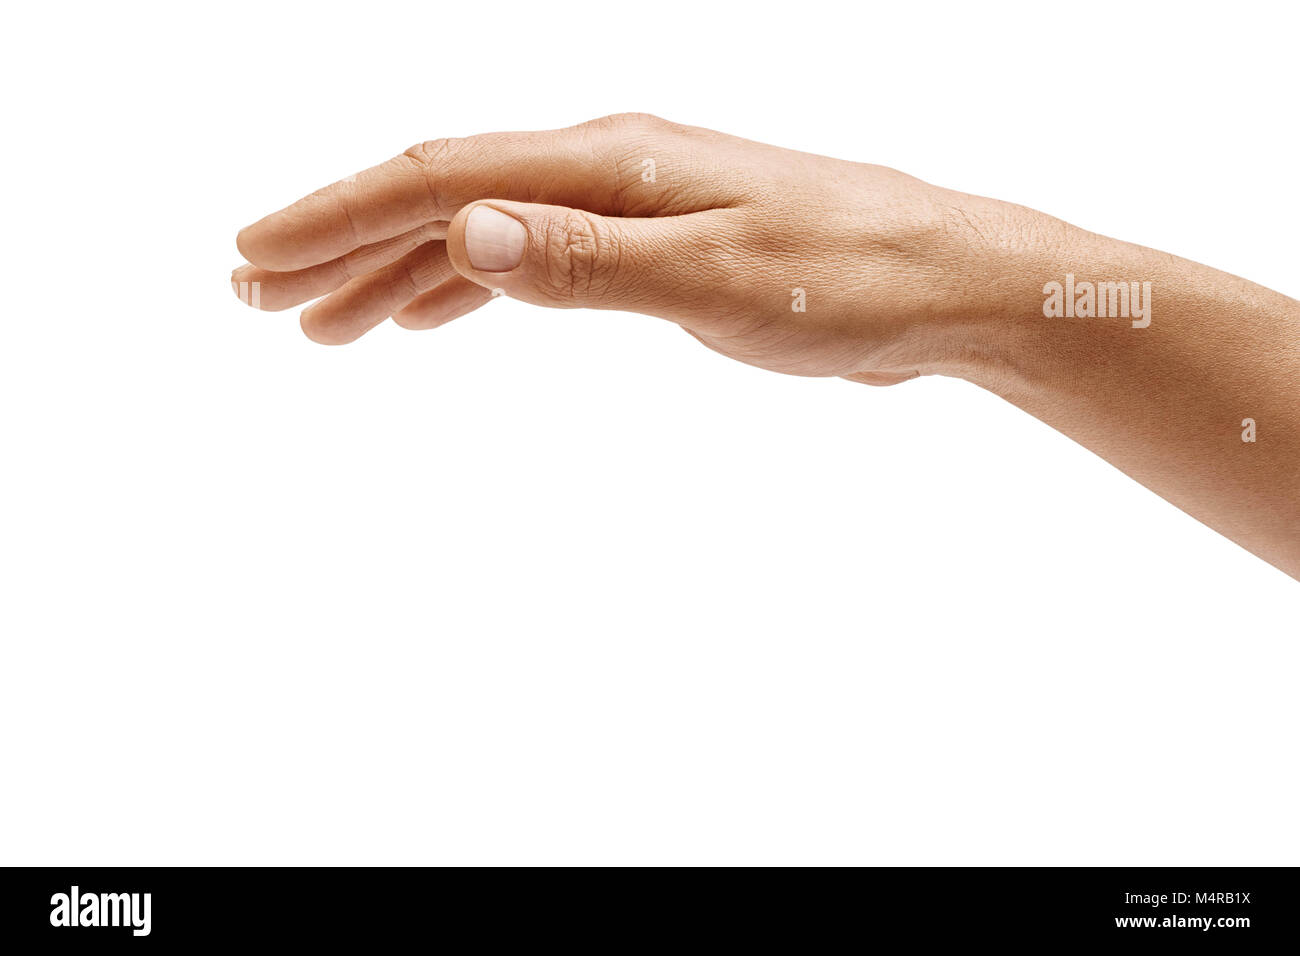 Man's hand sign isolated on white background. Inverted open palm, close up. High resolution product Stock Photo